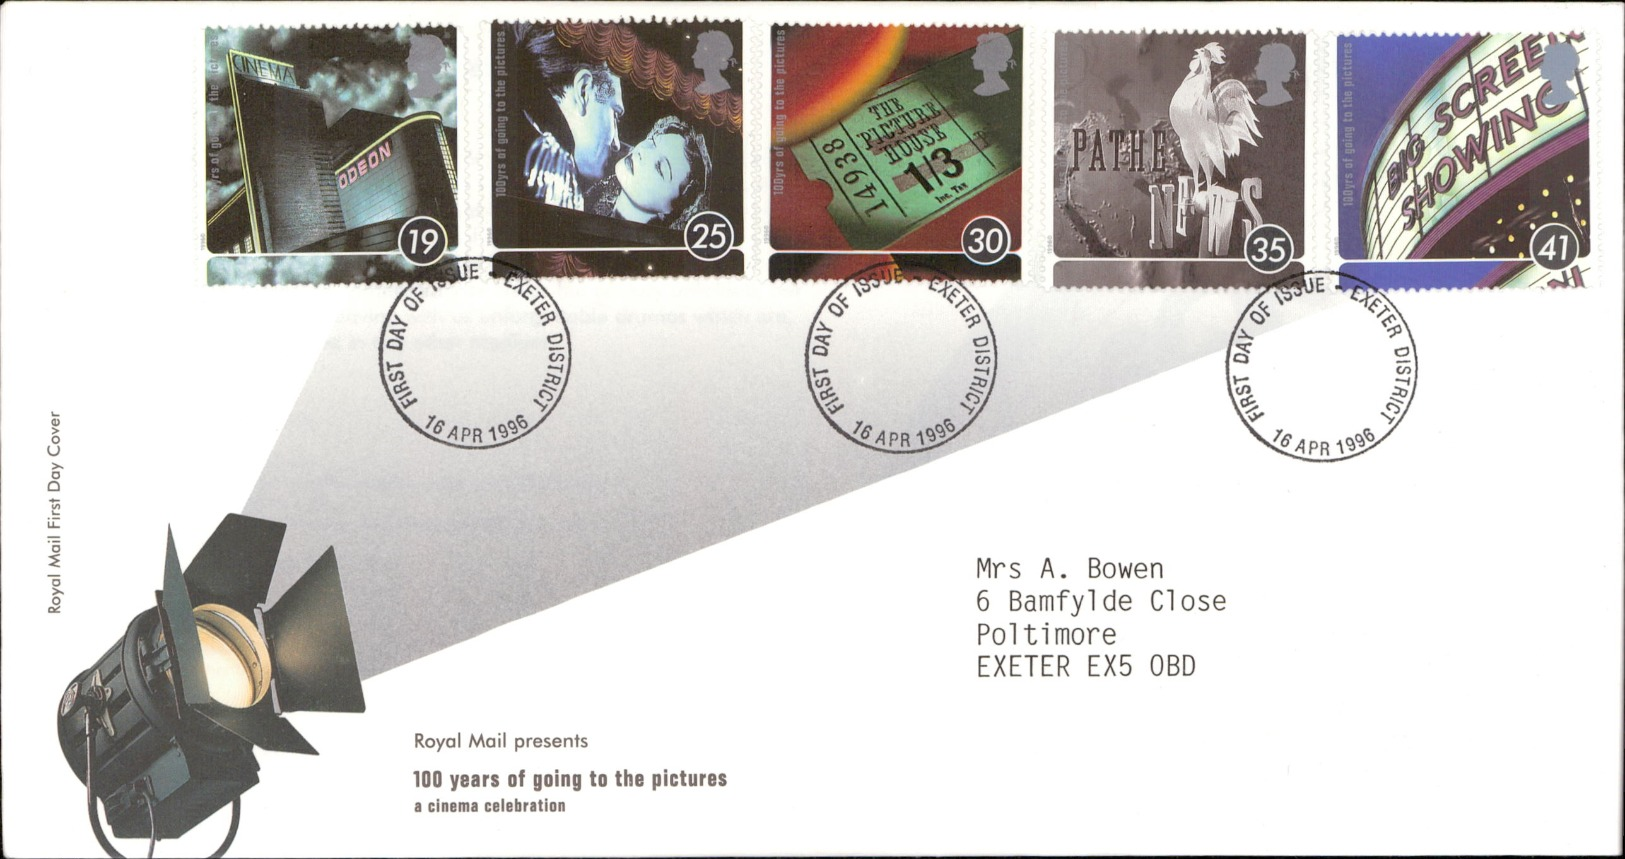 16.04.1996 100 Years Of Going To The Pictures A Cinema Celebration Royal Mail First Day Cover FDC Exeter District SHS - 1991-2000 Em. Décimales